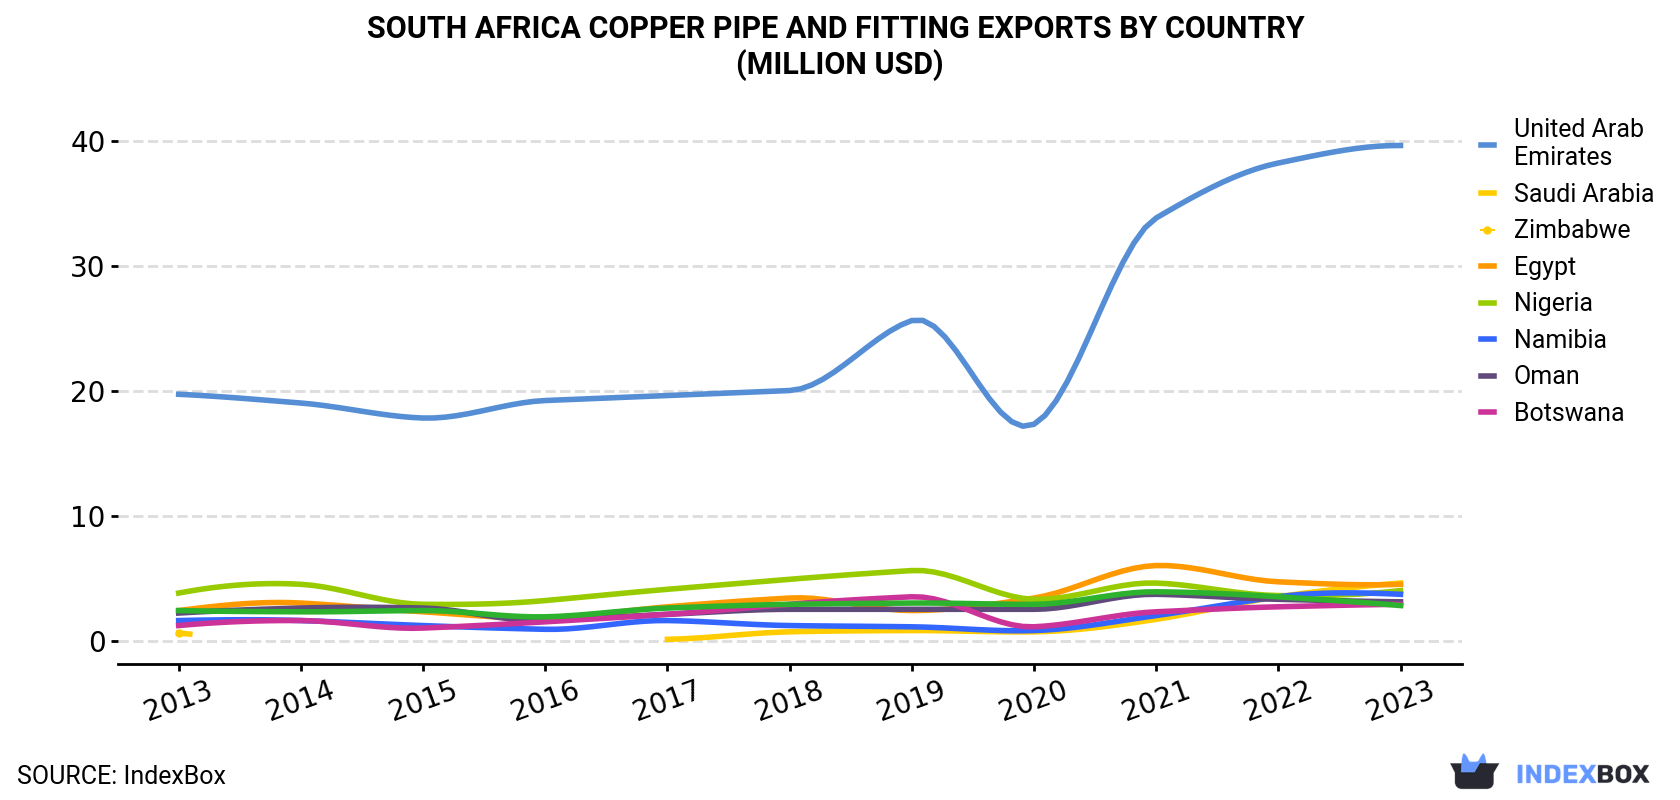 South Africa Copper Pipe And Fitting Exports By Country (Million USD)